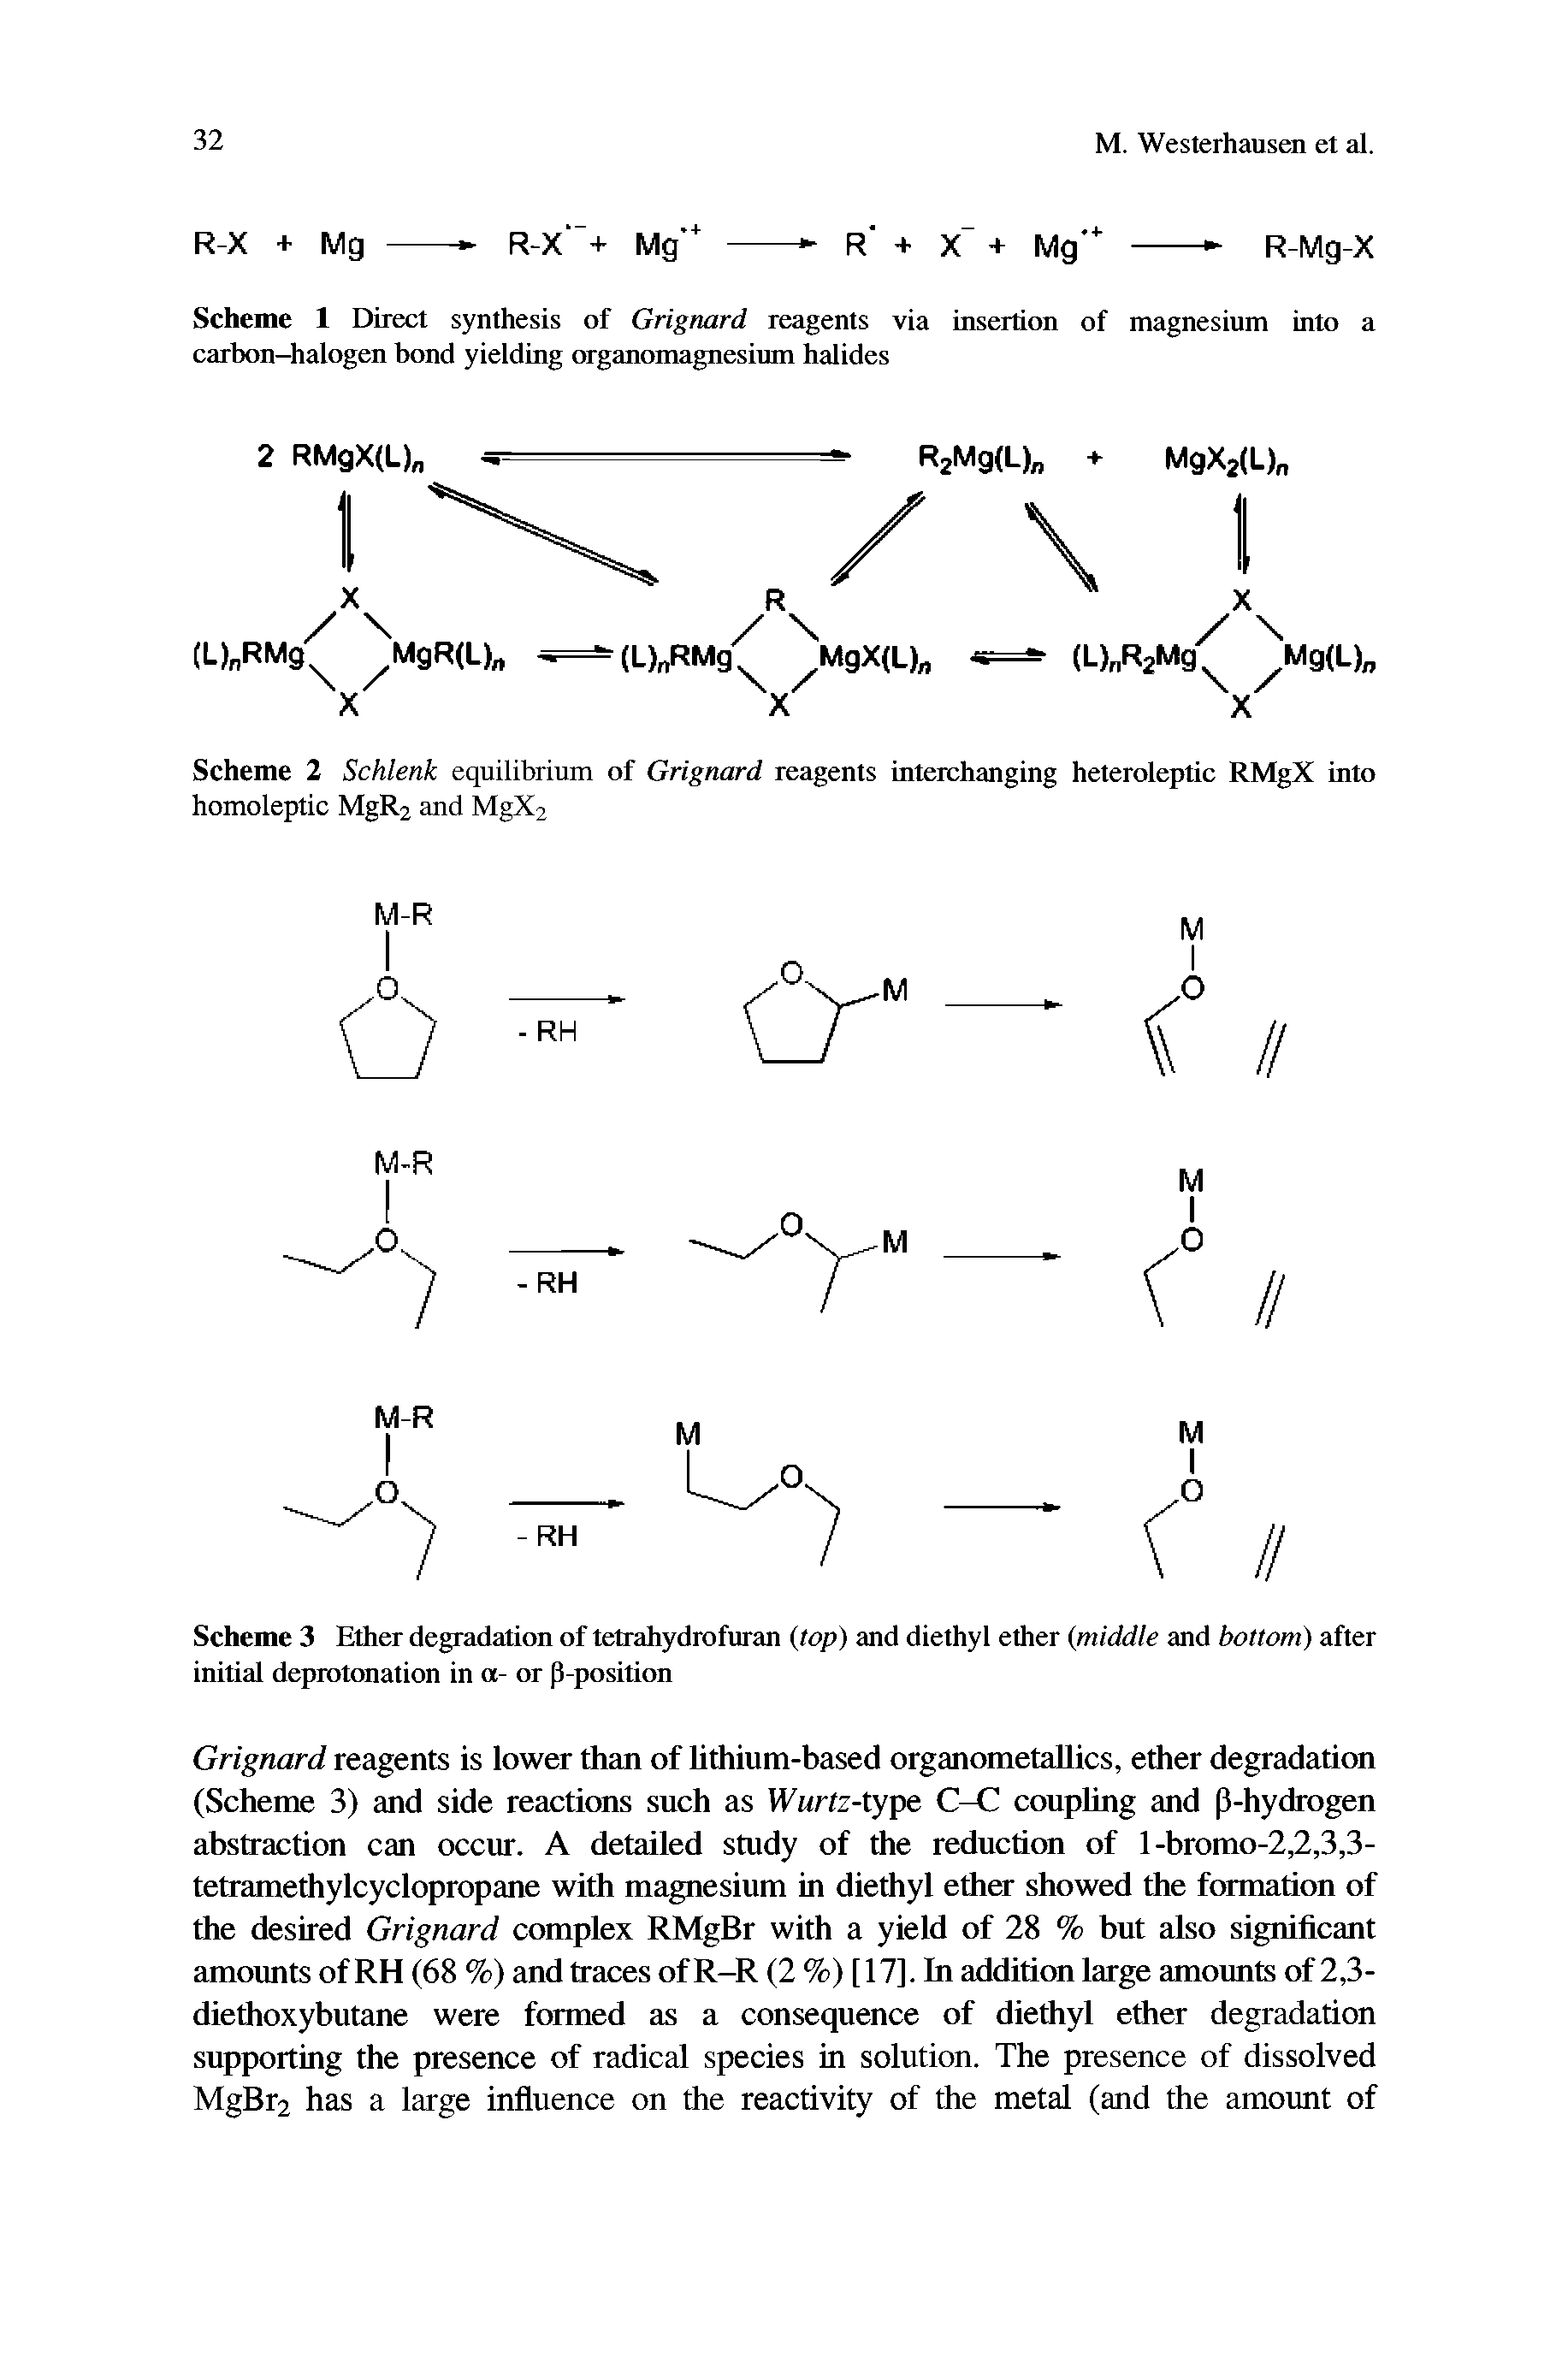 Scheme 3 Ether degradation of tetrahydrofuran (top) and diethyl ether (middle and bottom) after initial deprotonation in a- or p-position...